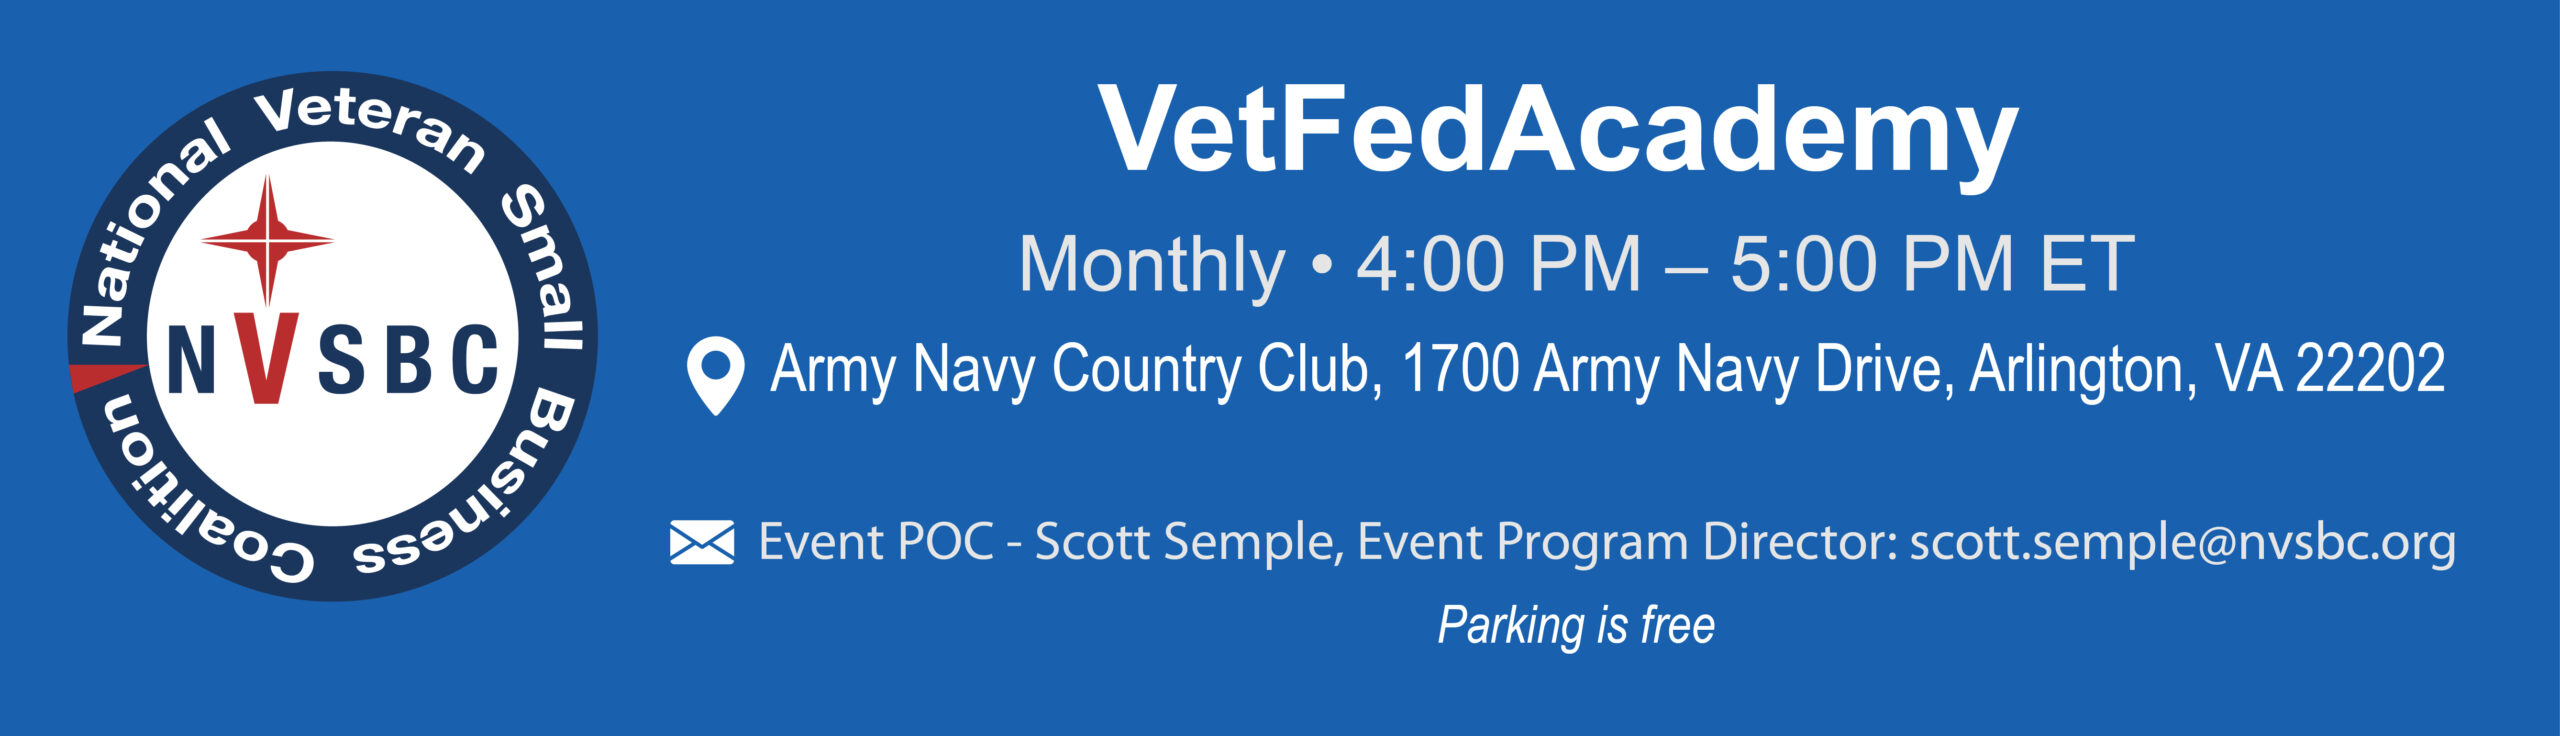 VETFedAcademy Monthly Event